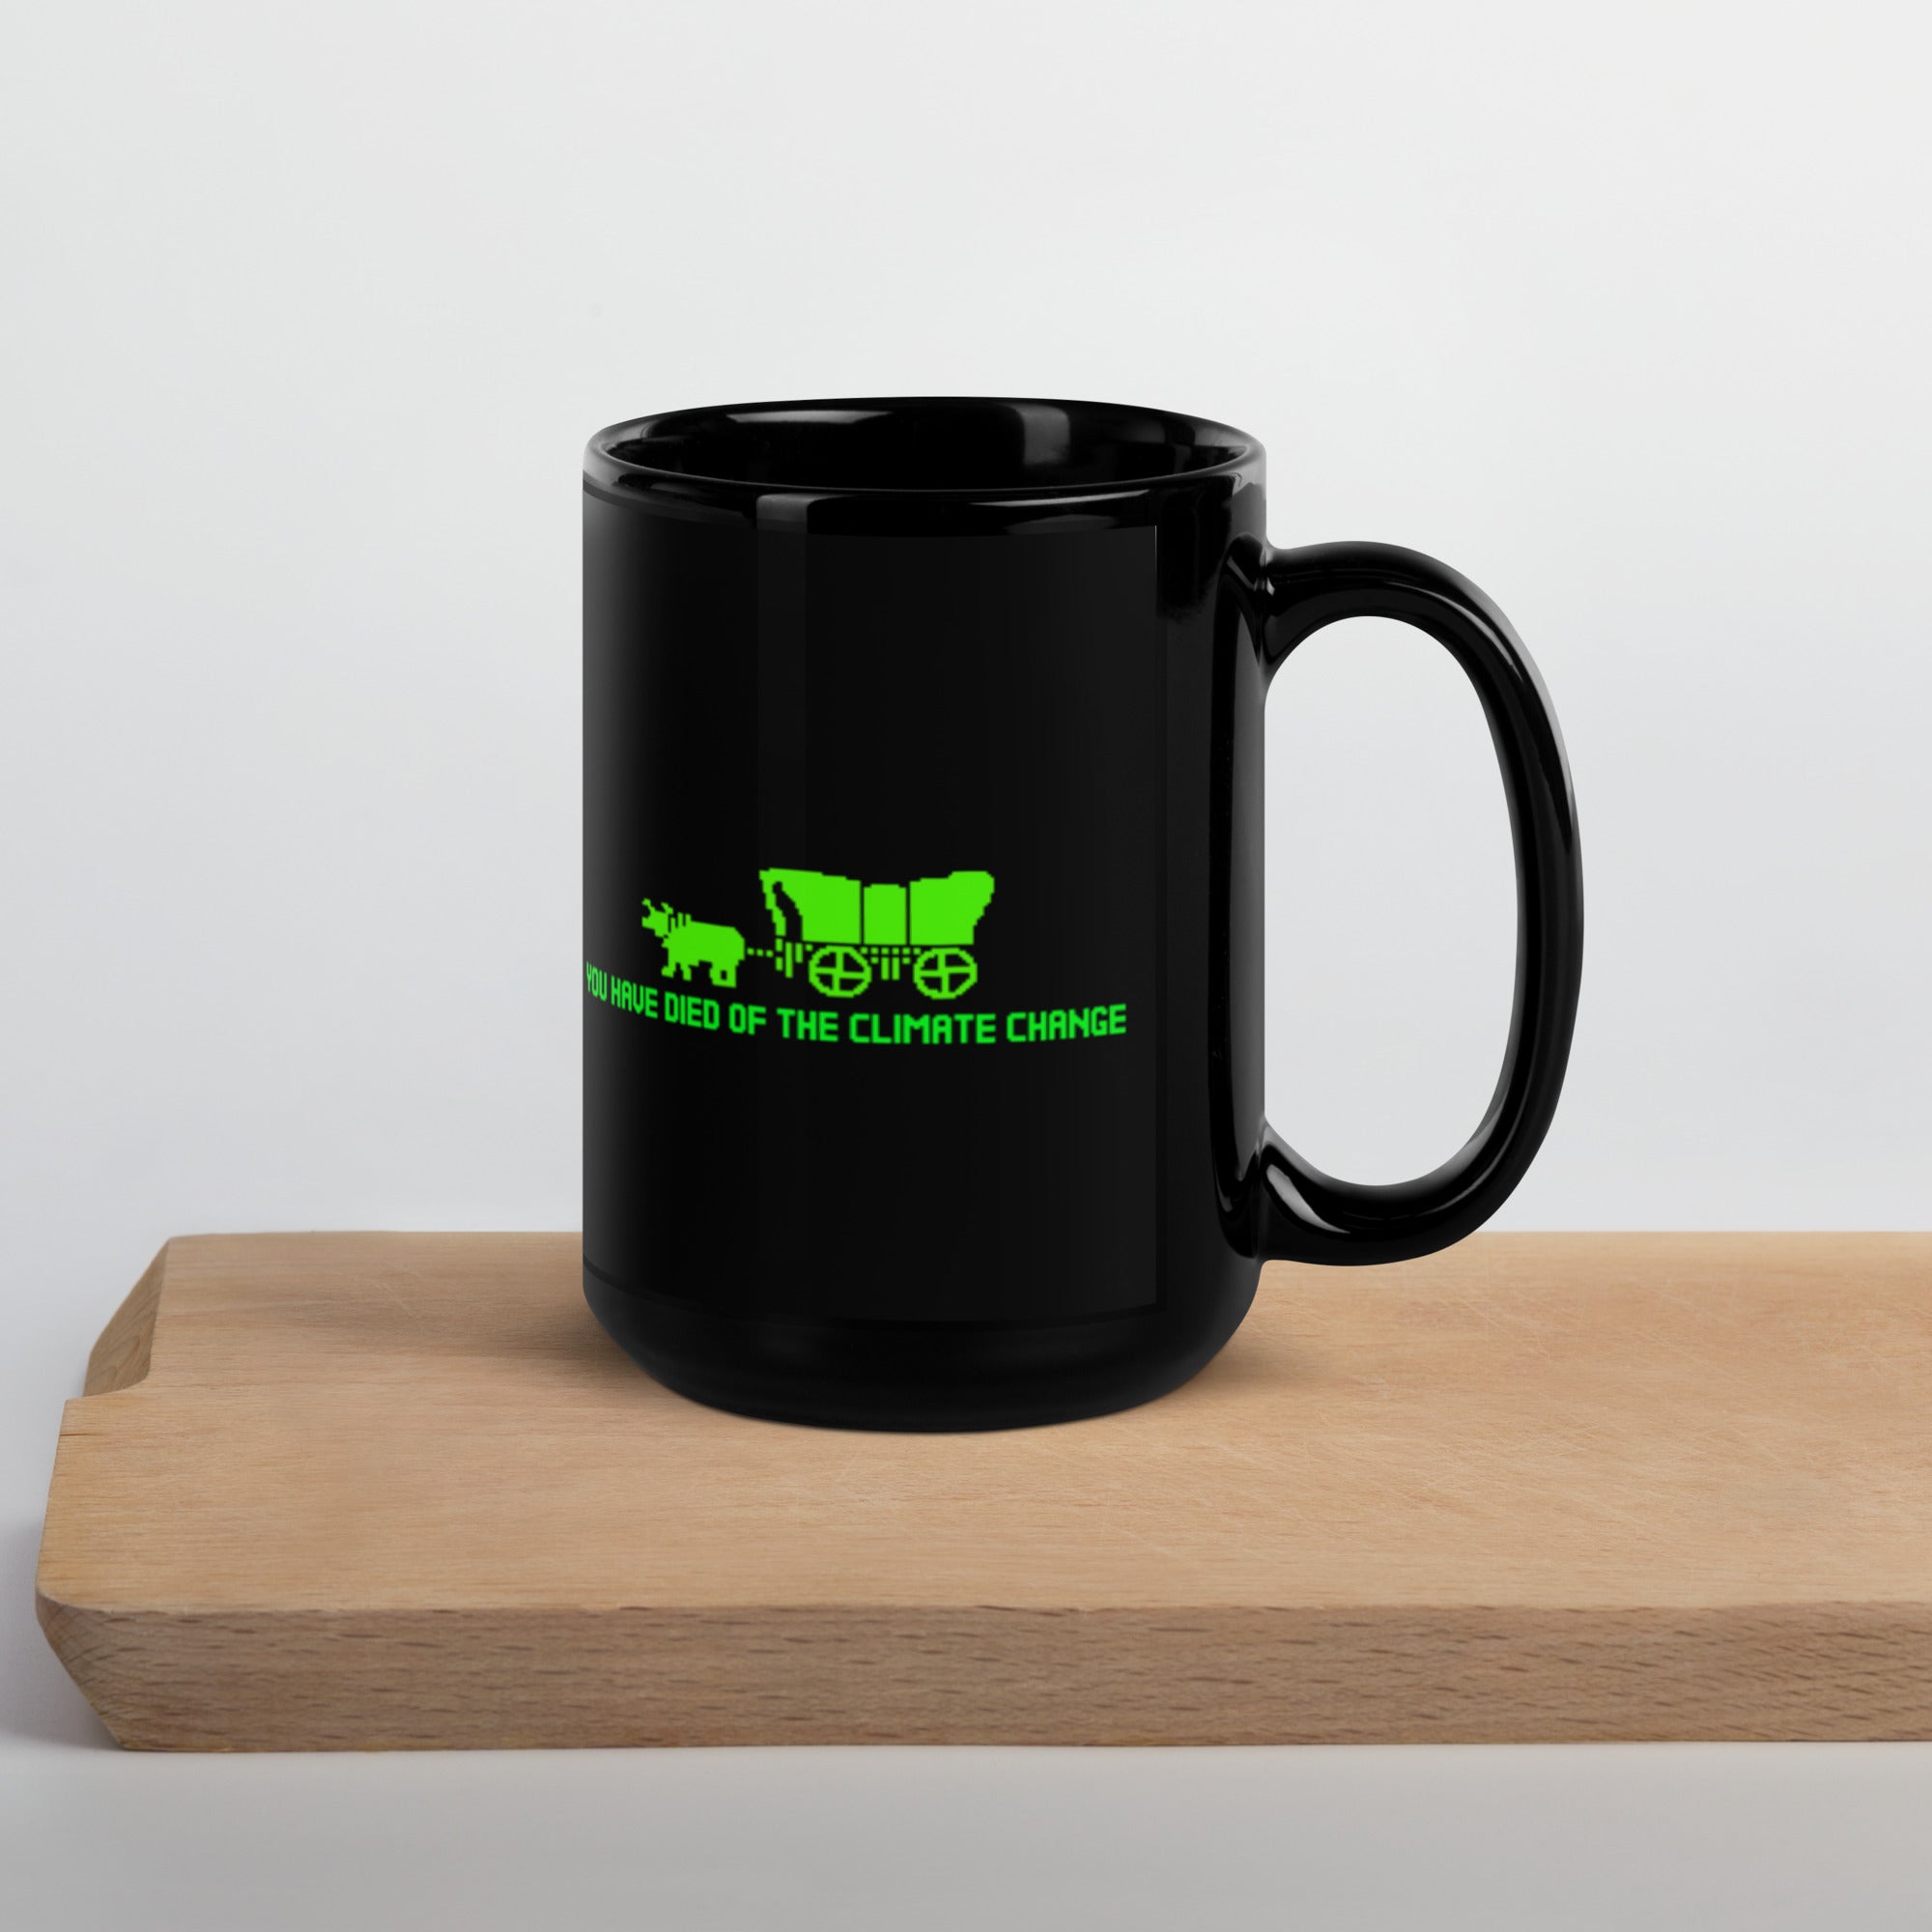 You Have Died of Climate Change Mug